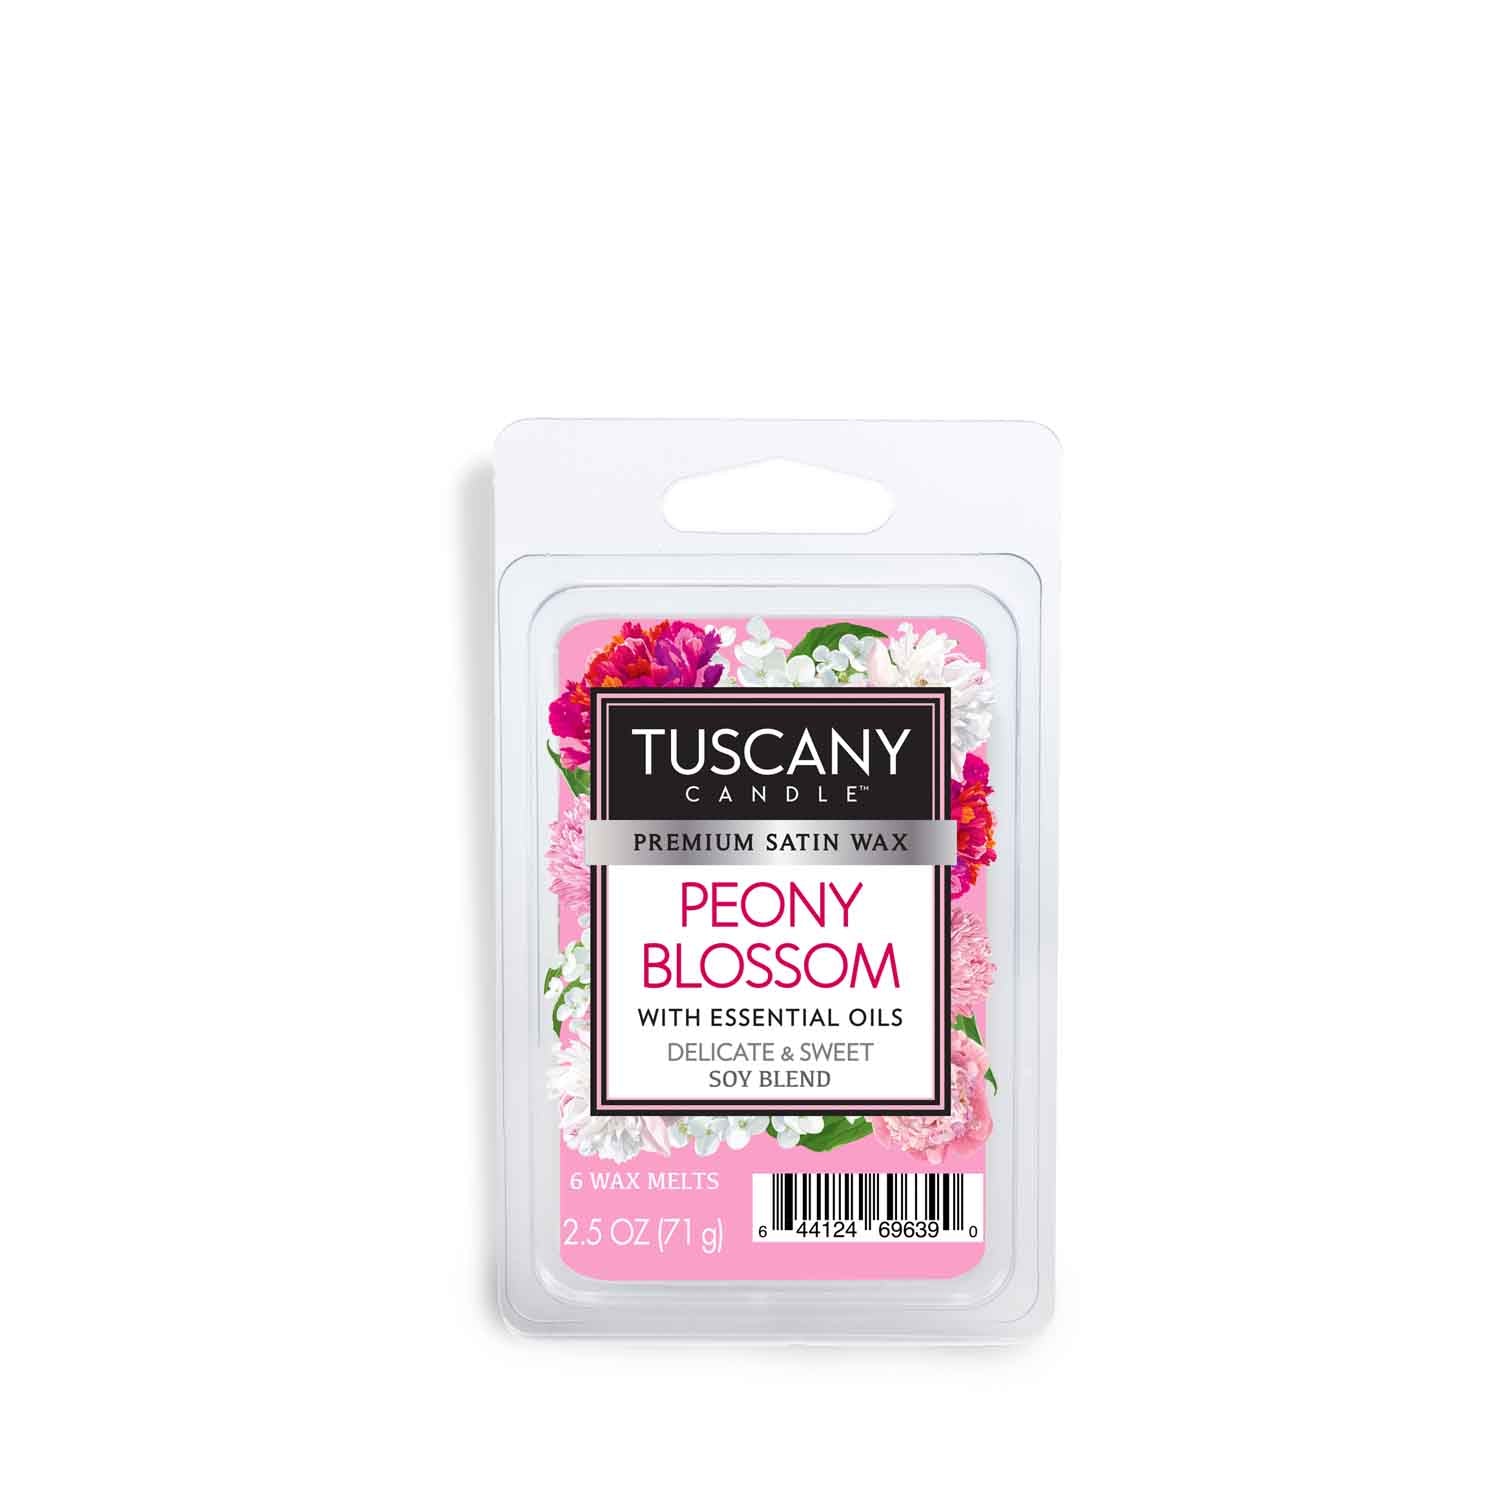 A bright pink wax melt bar from Tuscany Candle called "Peony Blossom"